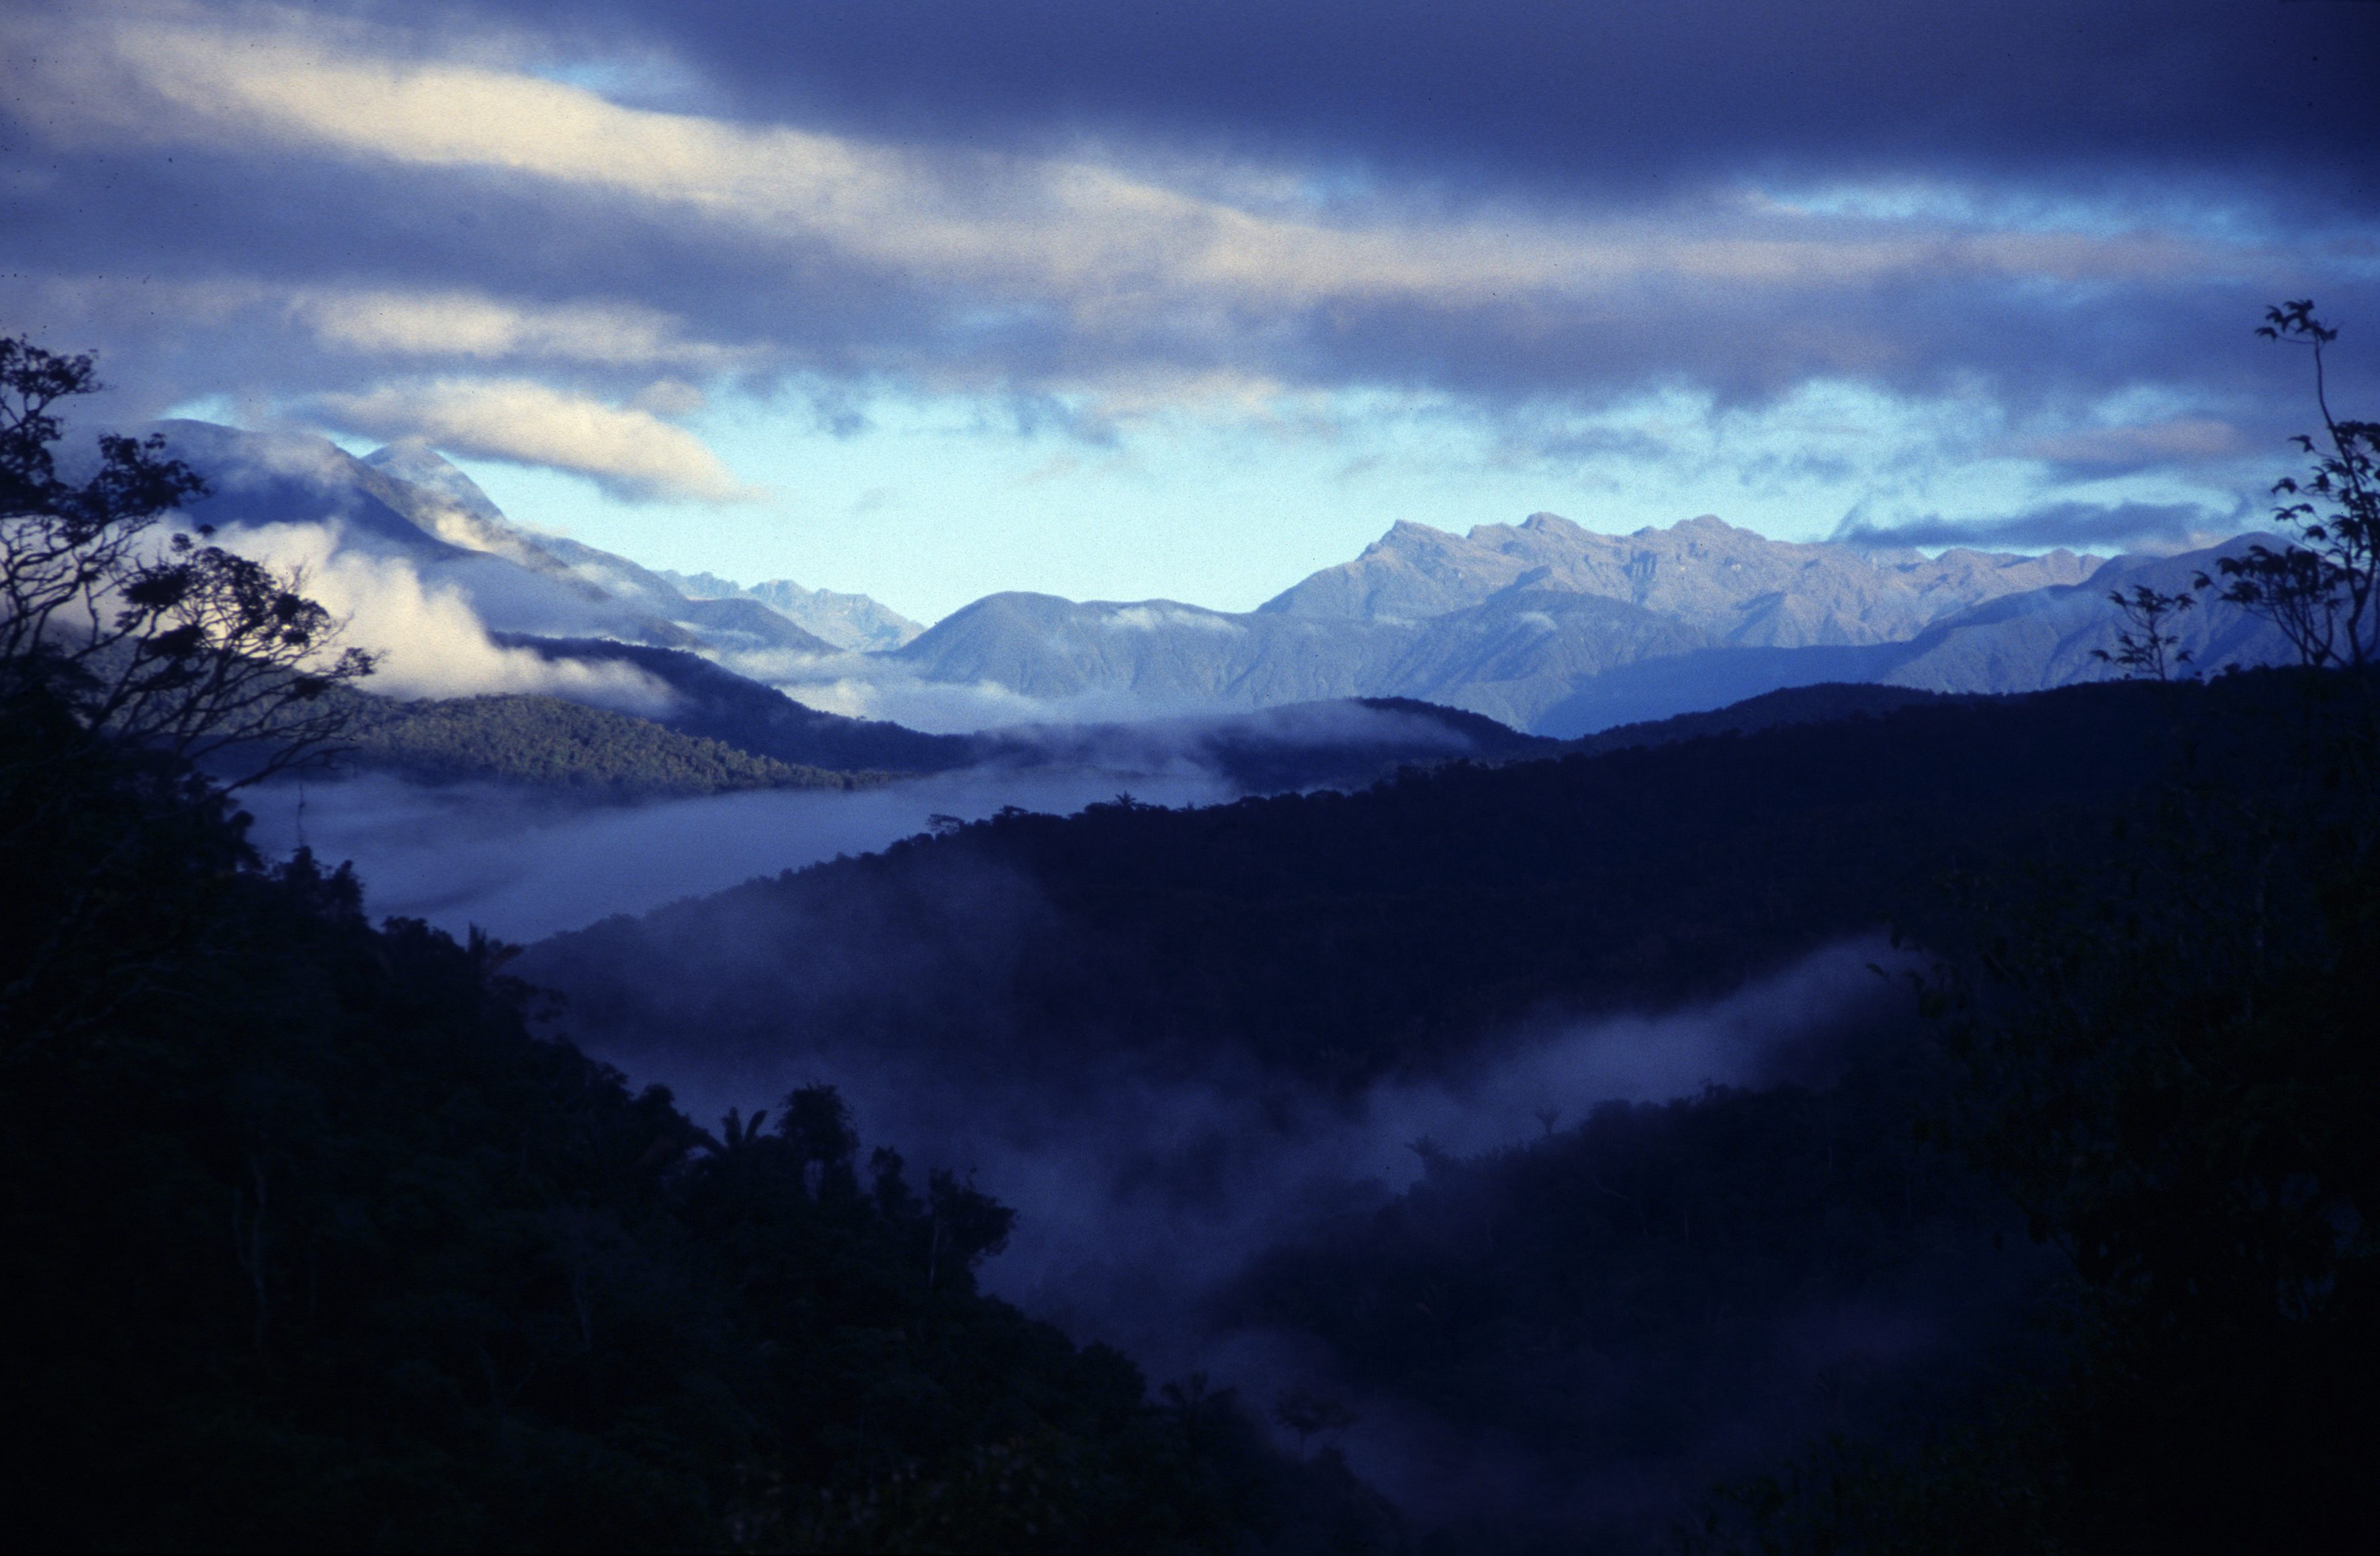 Madidi National Park in the upper Amazon river basin in Bolivia. Wikimedia Commons.